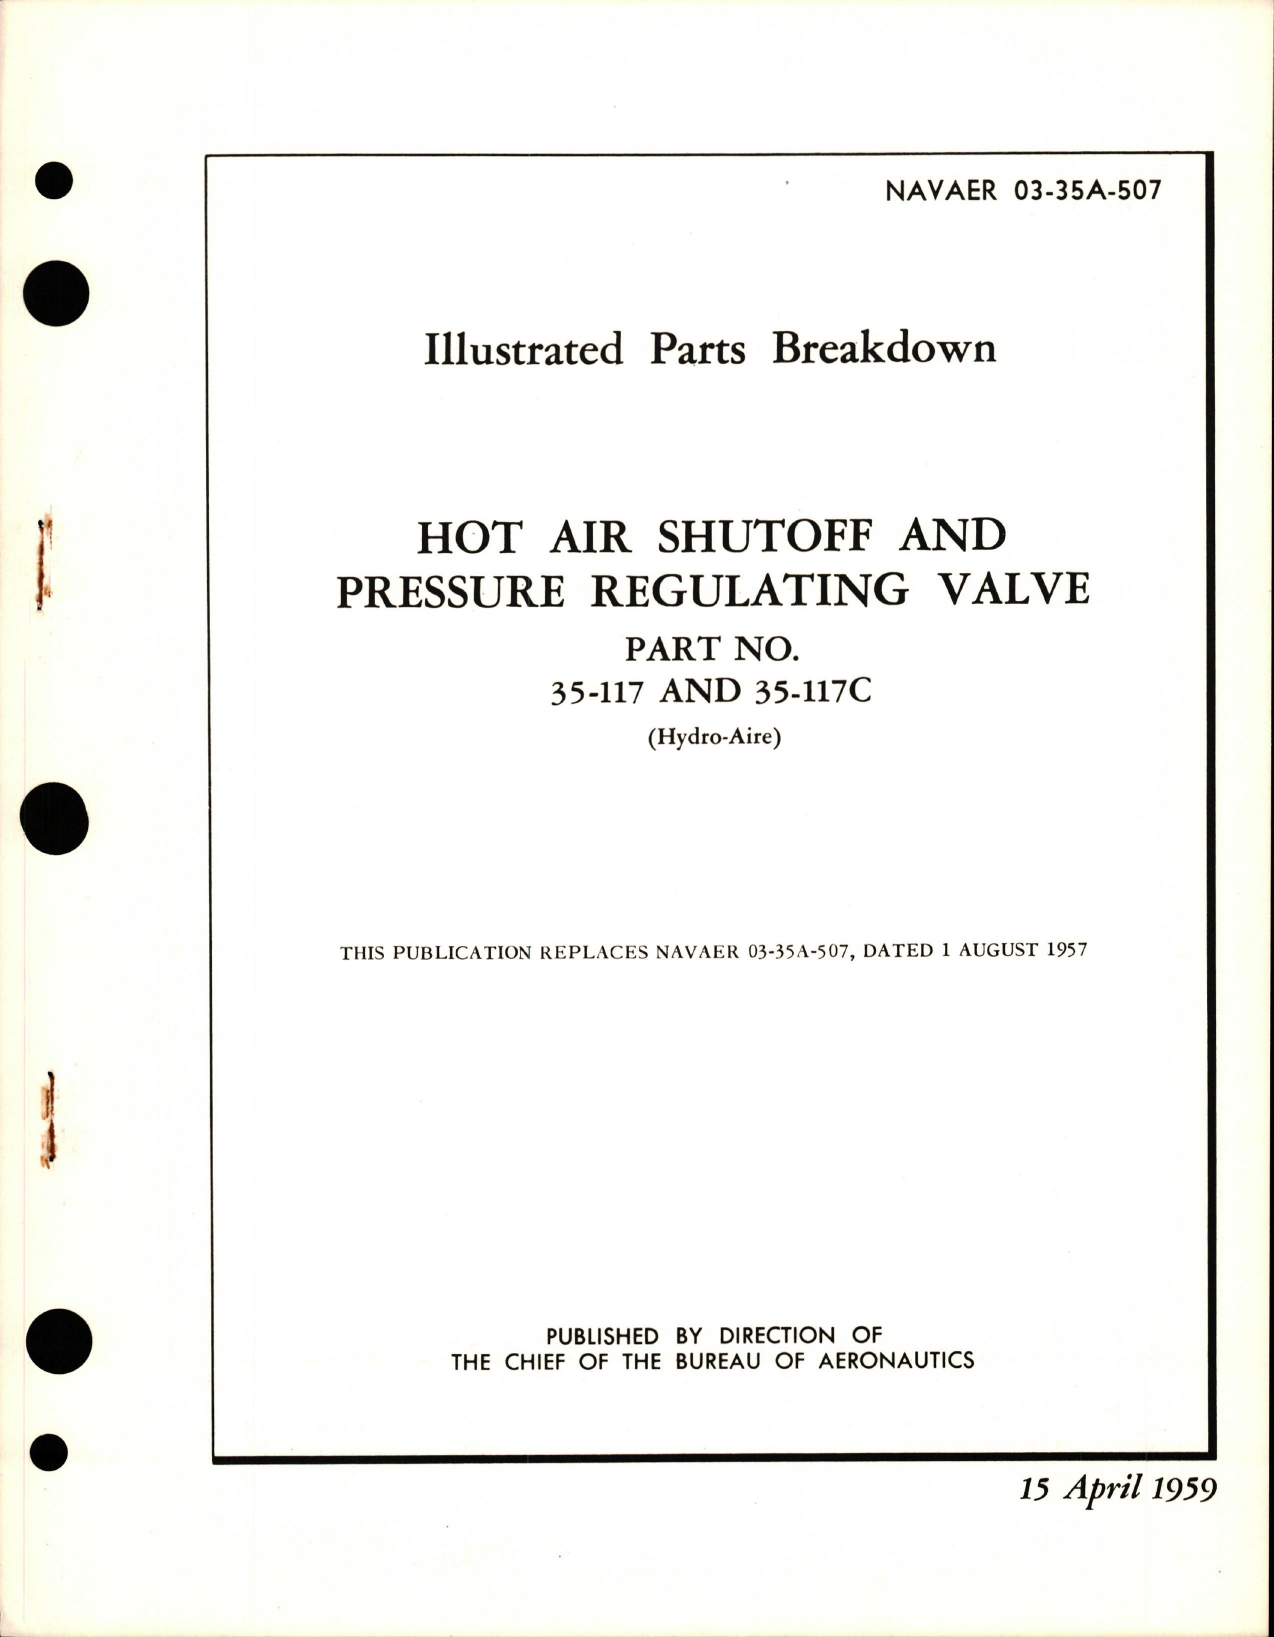 Sample page 1 from AirCorps Library document: Illustrated Parts Breakdown for Hot Air Shutoff and Pressure Regulating Valve - Part 35-117 and 35-117C 